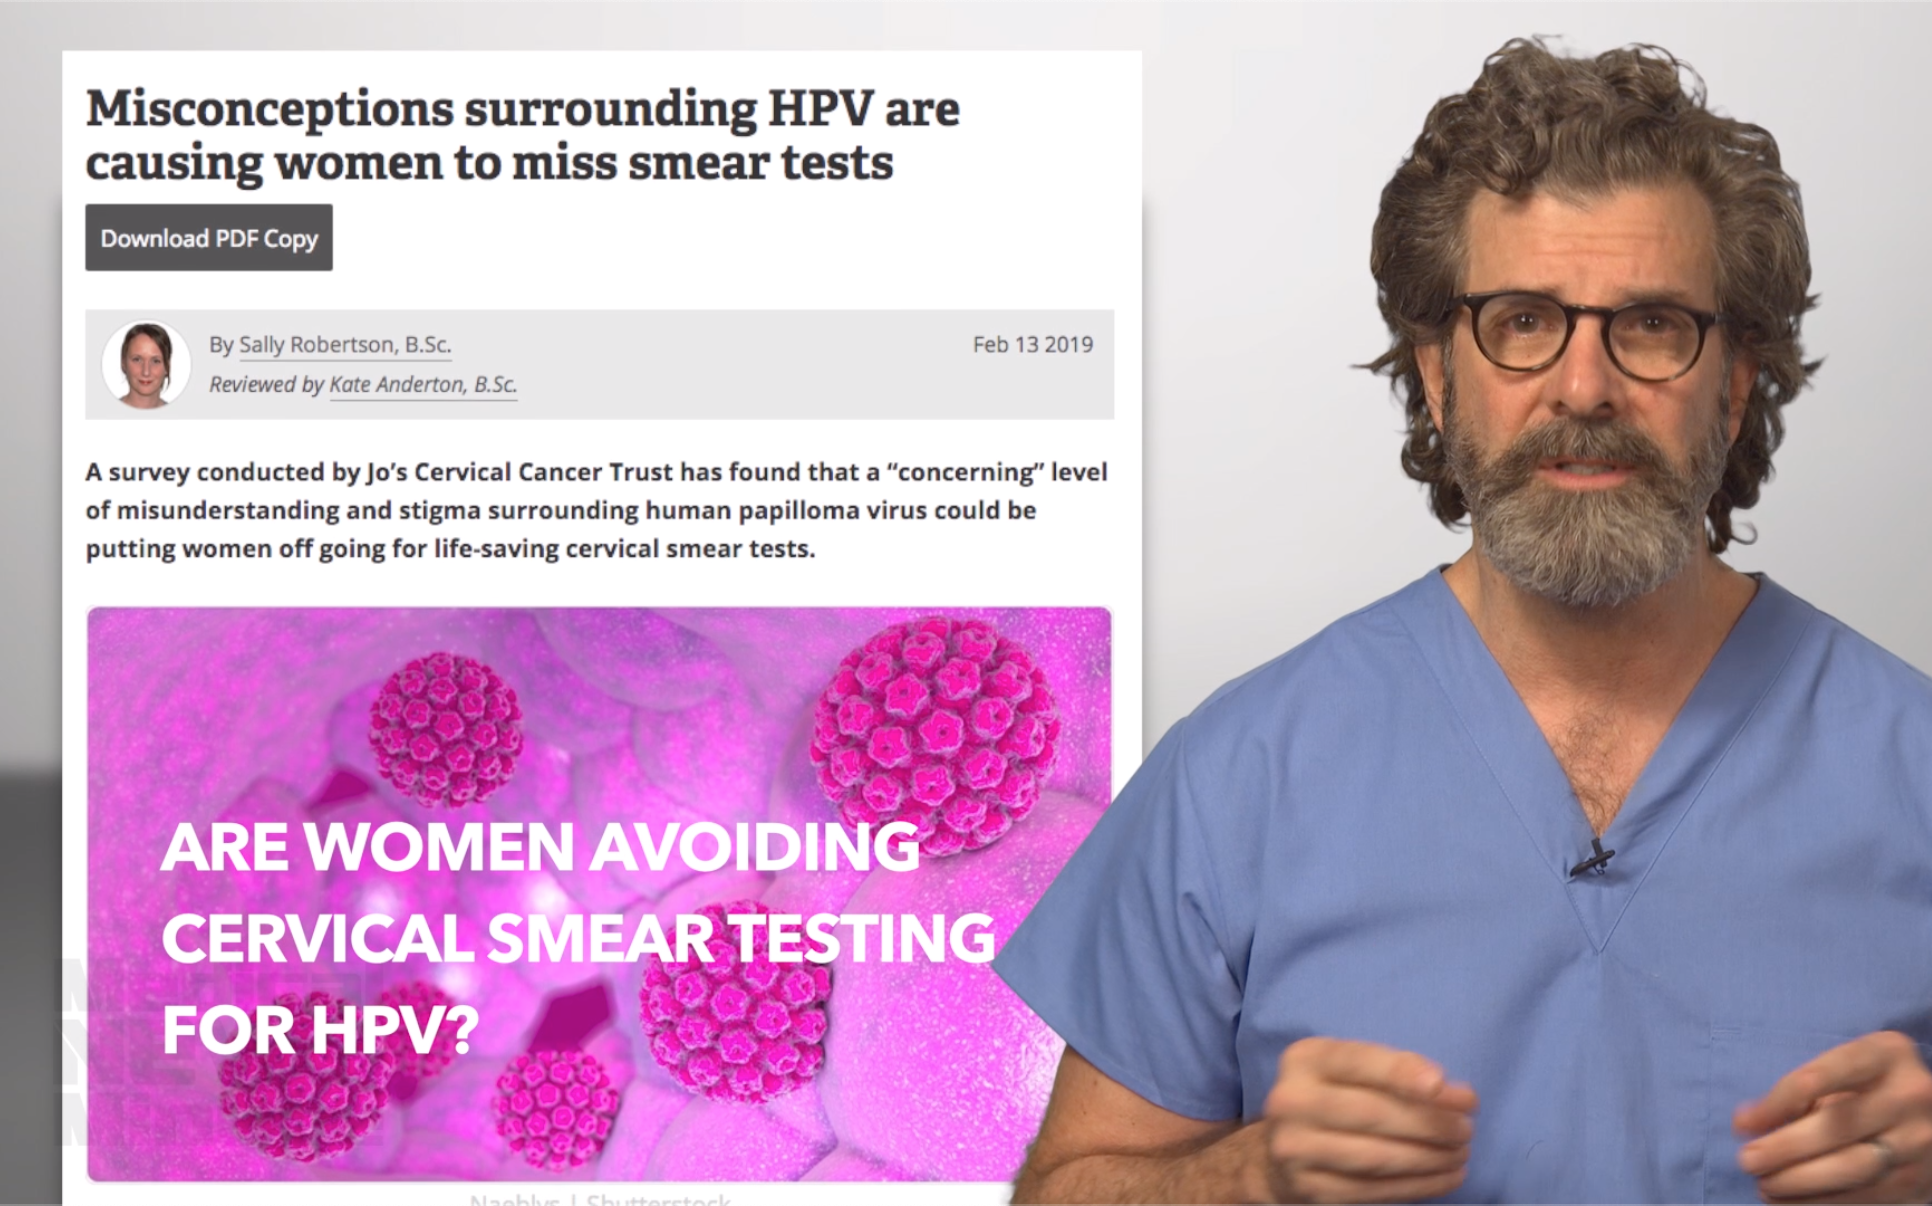 Misconceptions about HPV testing